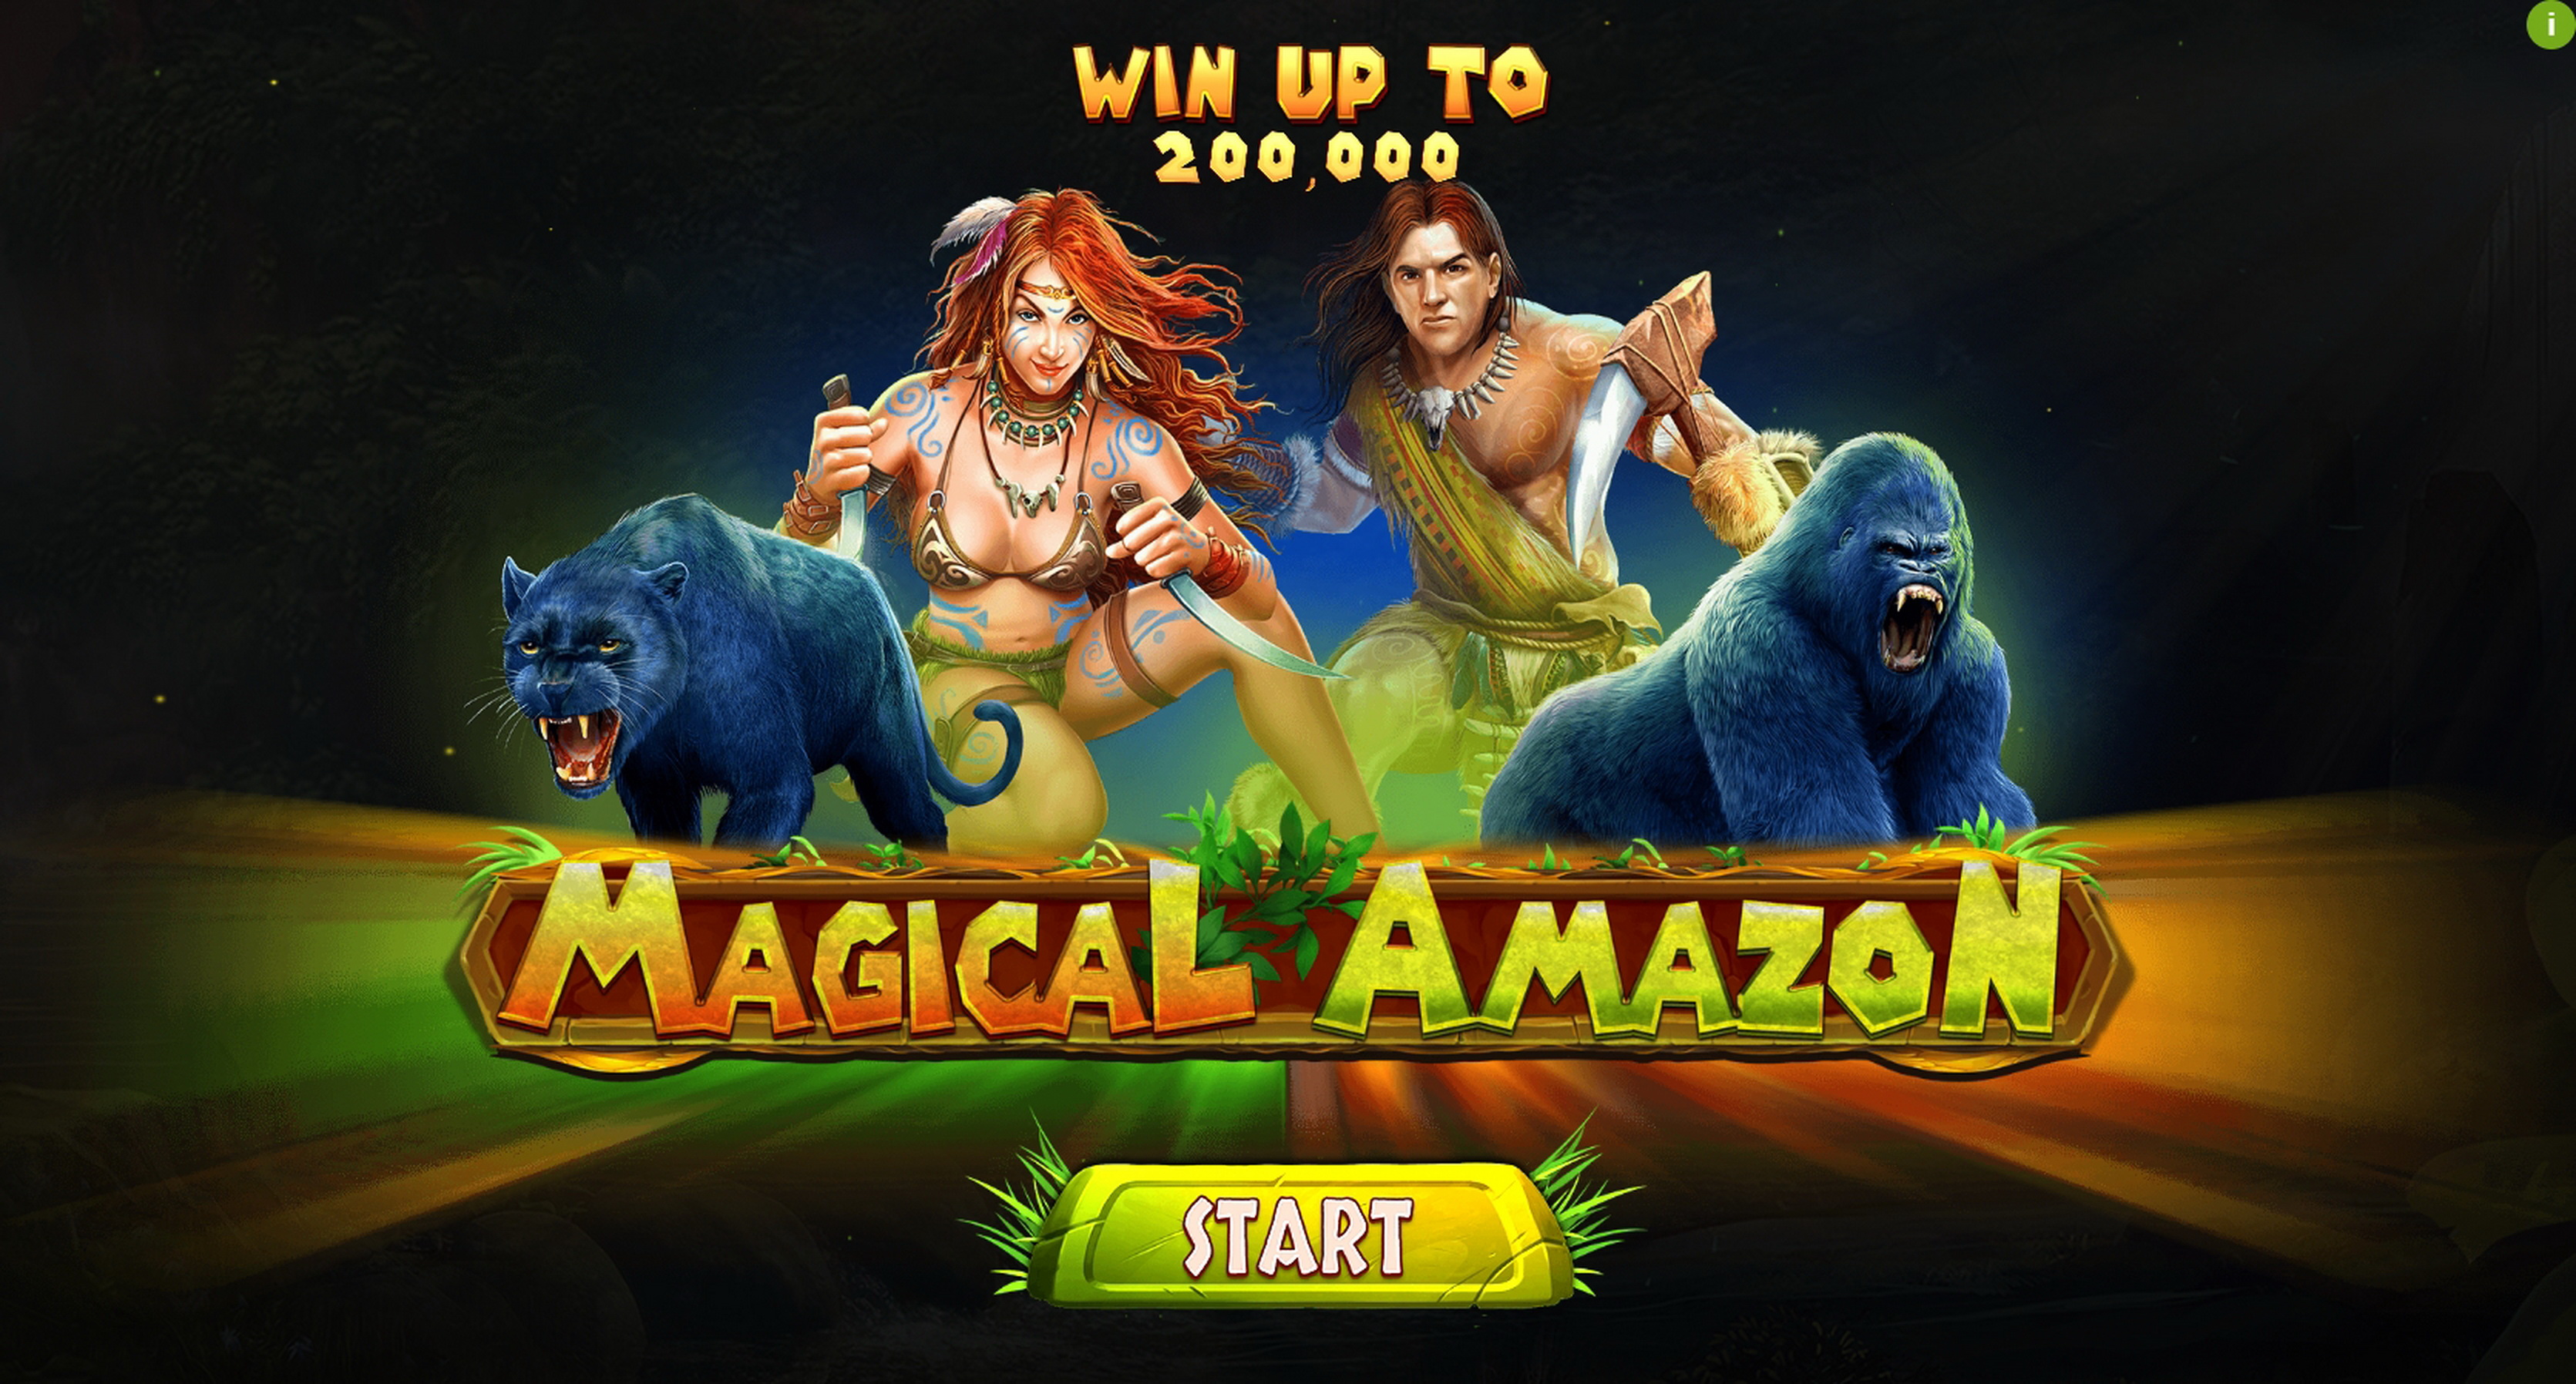 Play Magical Amazon Free Casino Slot Game by Spinomenal